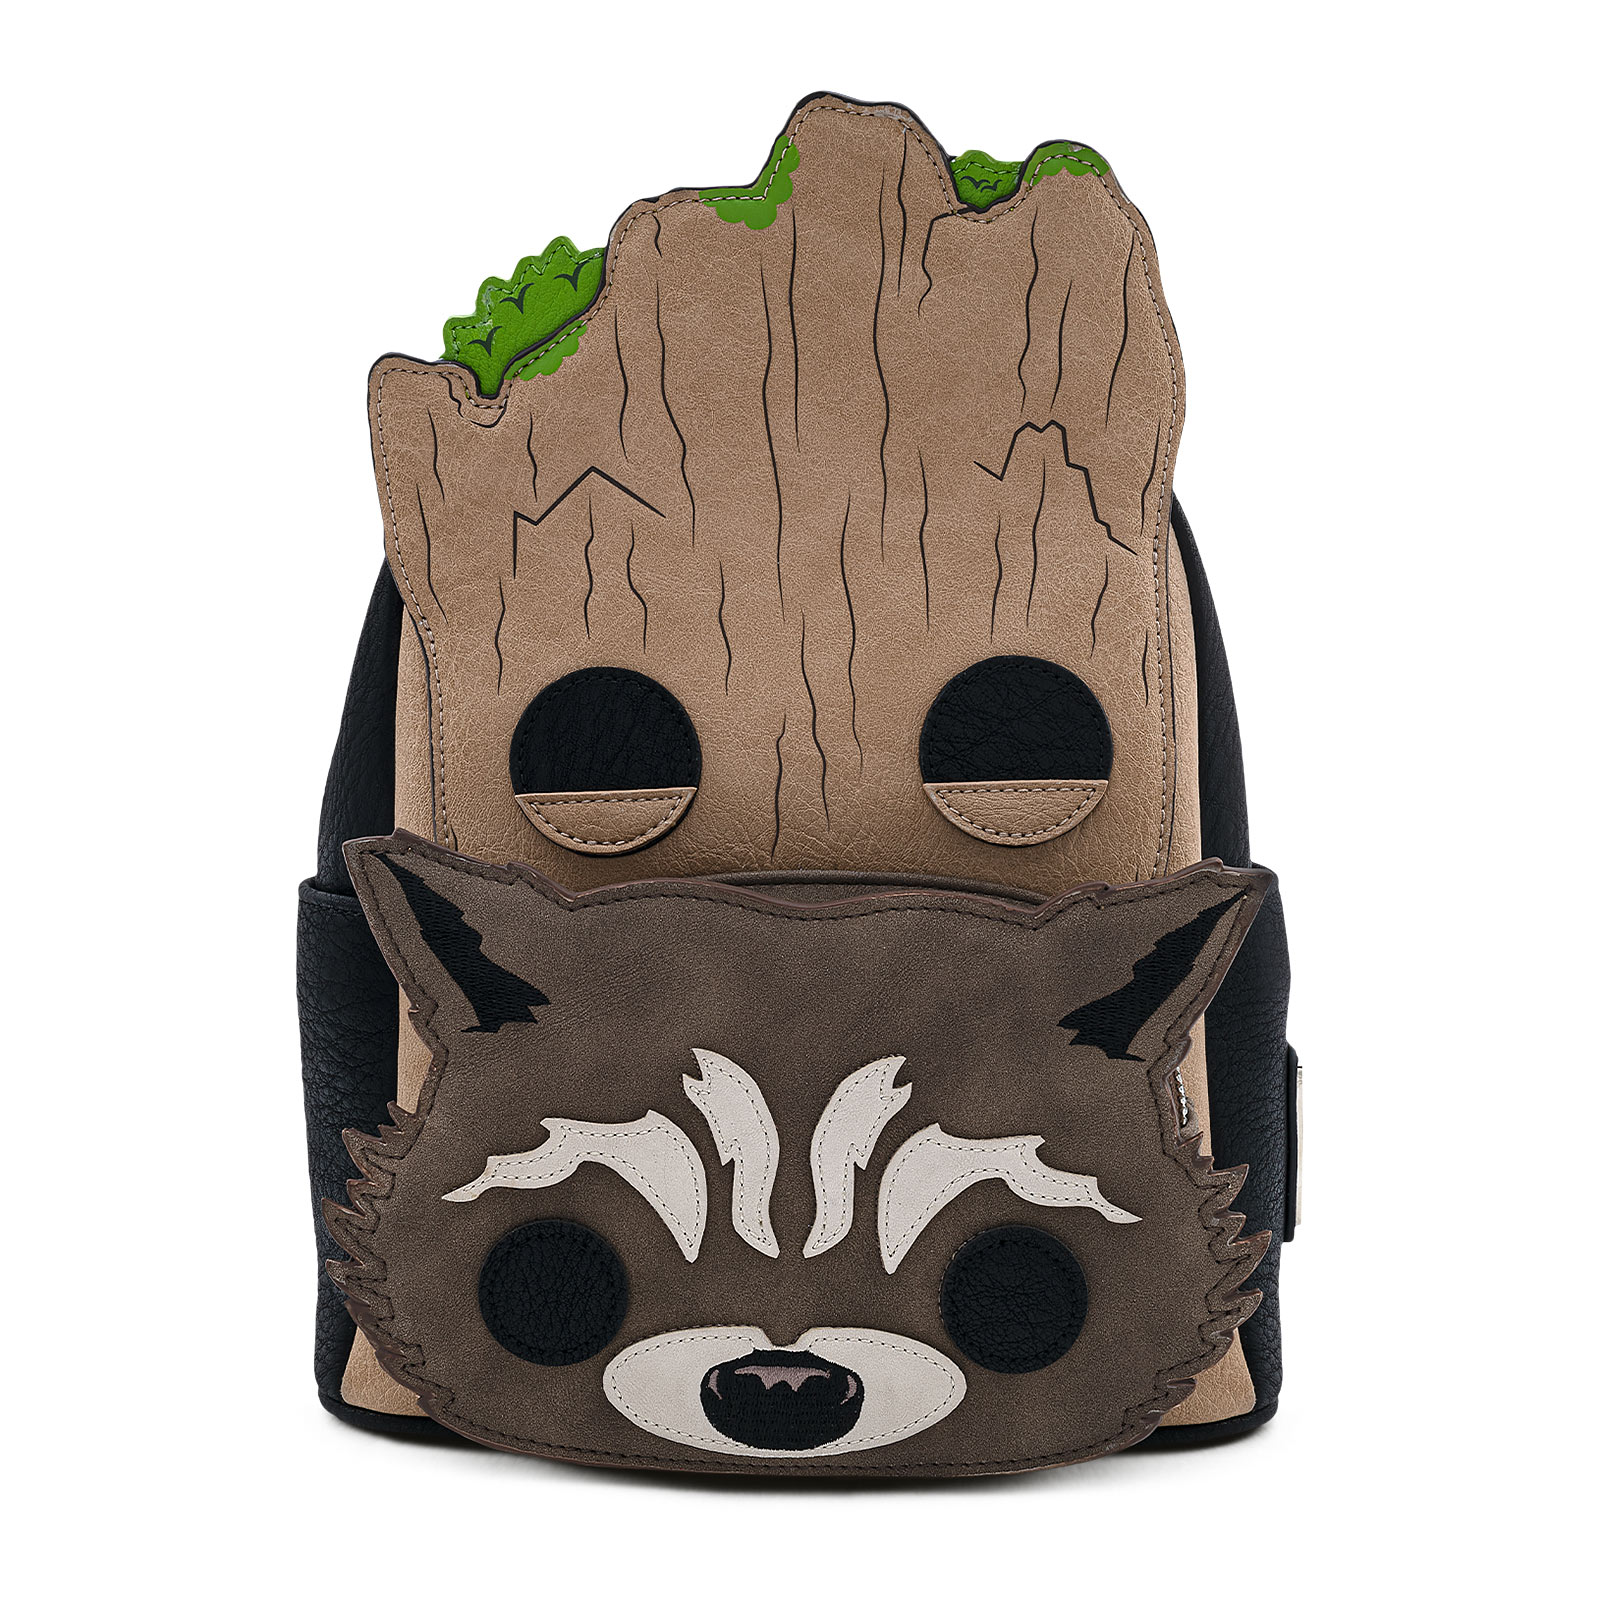 Guardians of the Galaxy - Groot and Rocket Mini Backpack